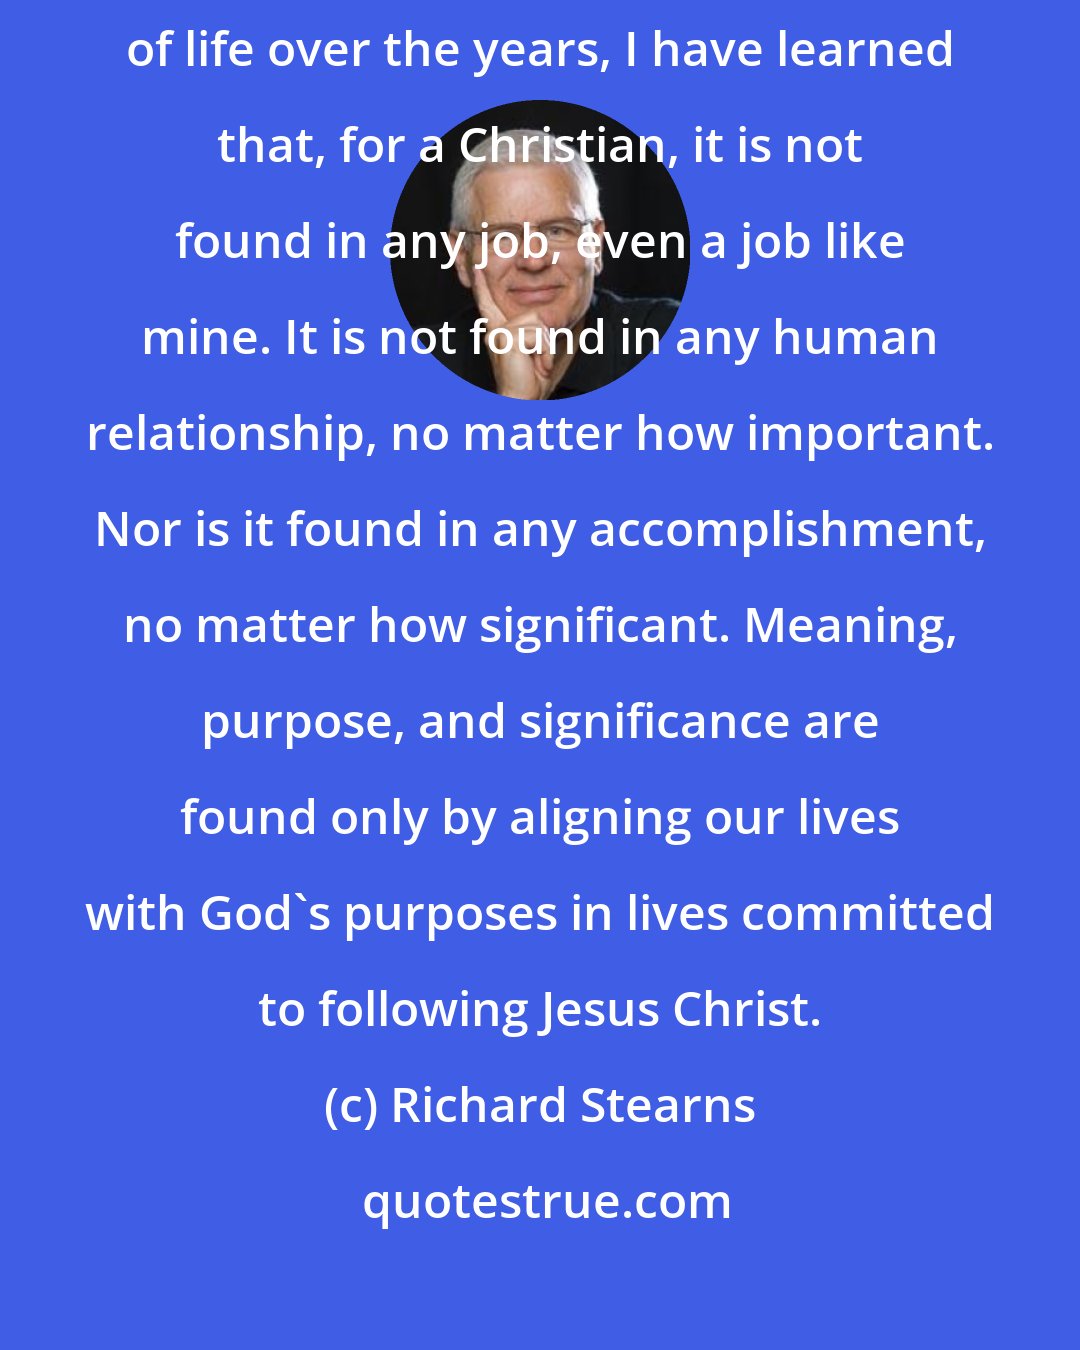 Richard Stearns: If I have learned anything about the purpose, meaning, and significance of life over the years, I have learned that, for a Christian, it is not found in any job, even a job like mine. It is not found in any human relationship, no matter how important. Nor is it found in any accomplishment, no matter how significant. Meaning, purpose, and significance are found only by aligning our lives with God's purposes in lives committed to following Jesus Christ.